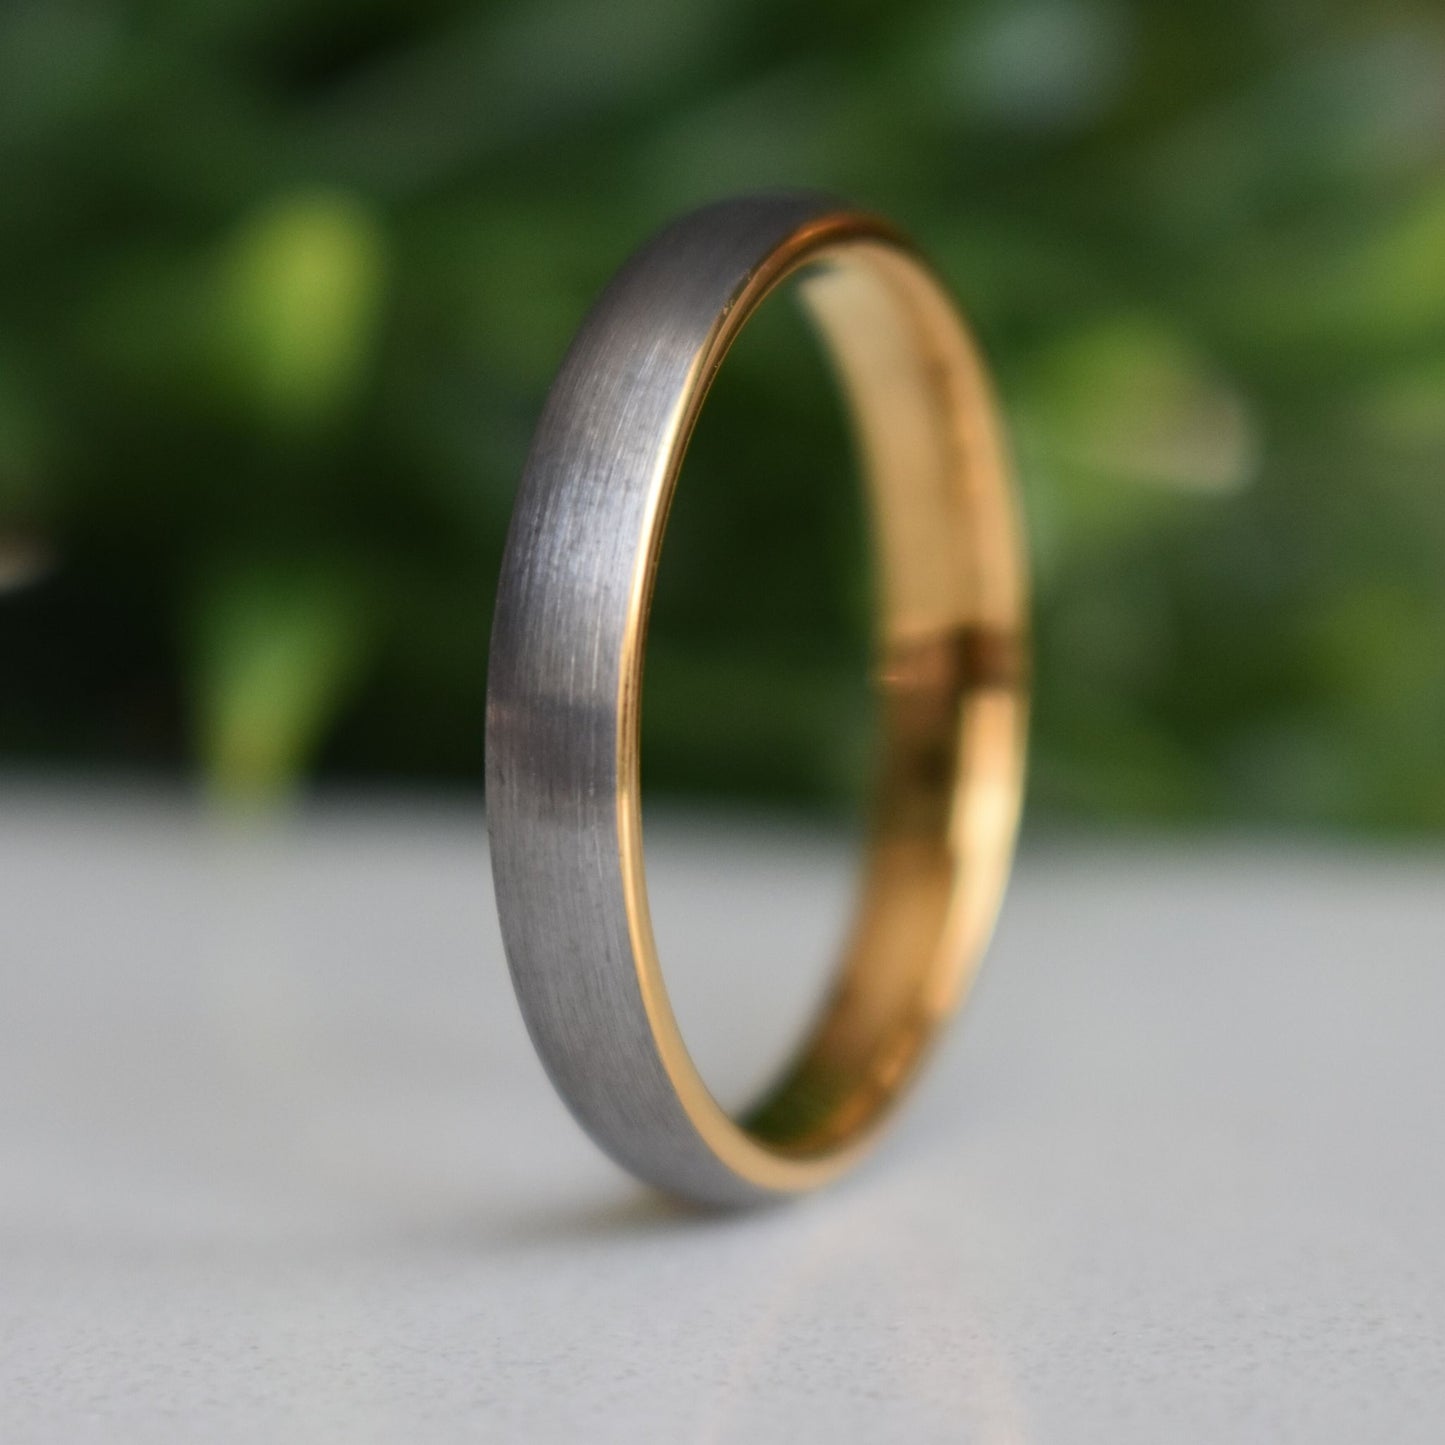 Tungsten Ring 4mm Brushed Silver with Yellow Gold Comfort fit band - Tungsten Titans